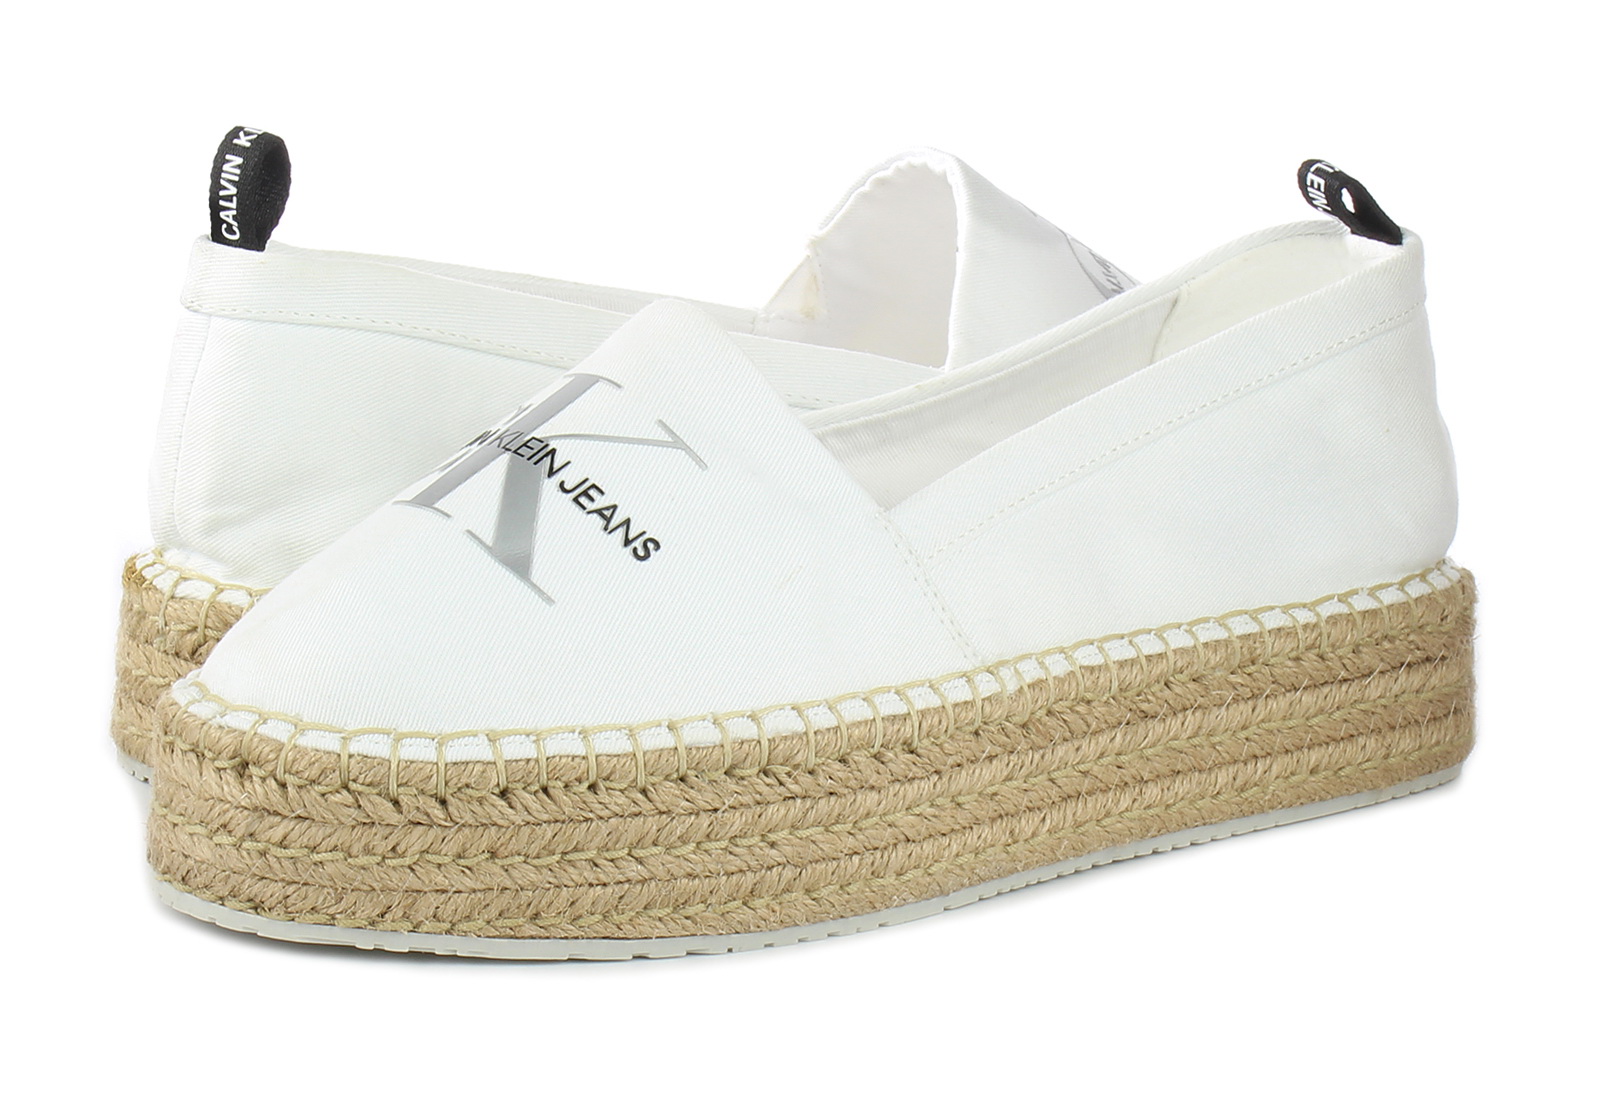 Calvin Klein Espadrilles - Elsa - YW00037-YAF - Online shop for sneakers,  shoes and boots